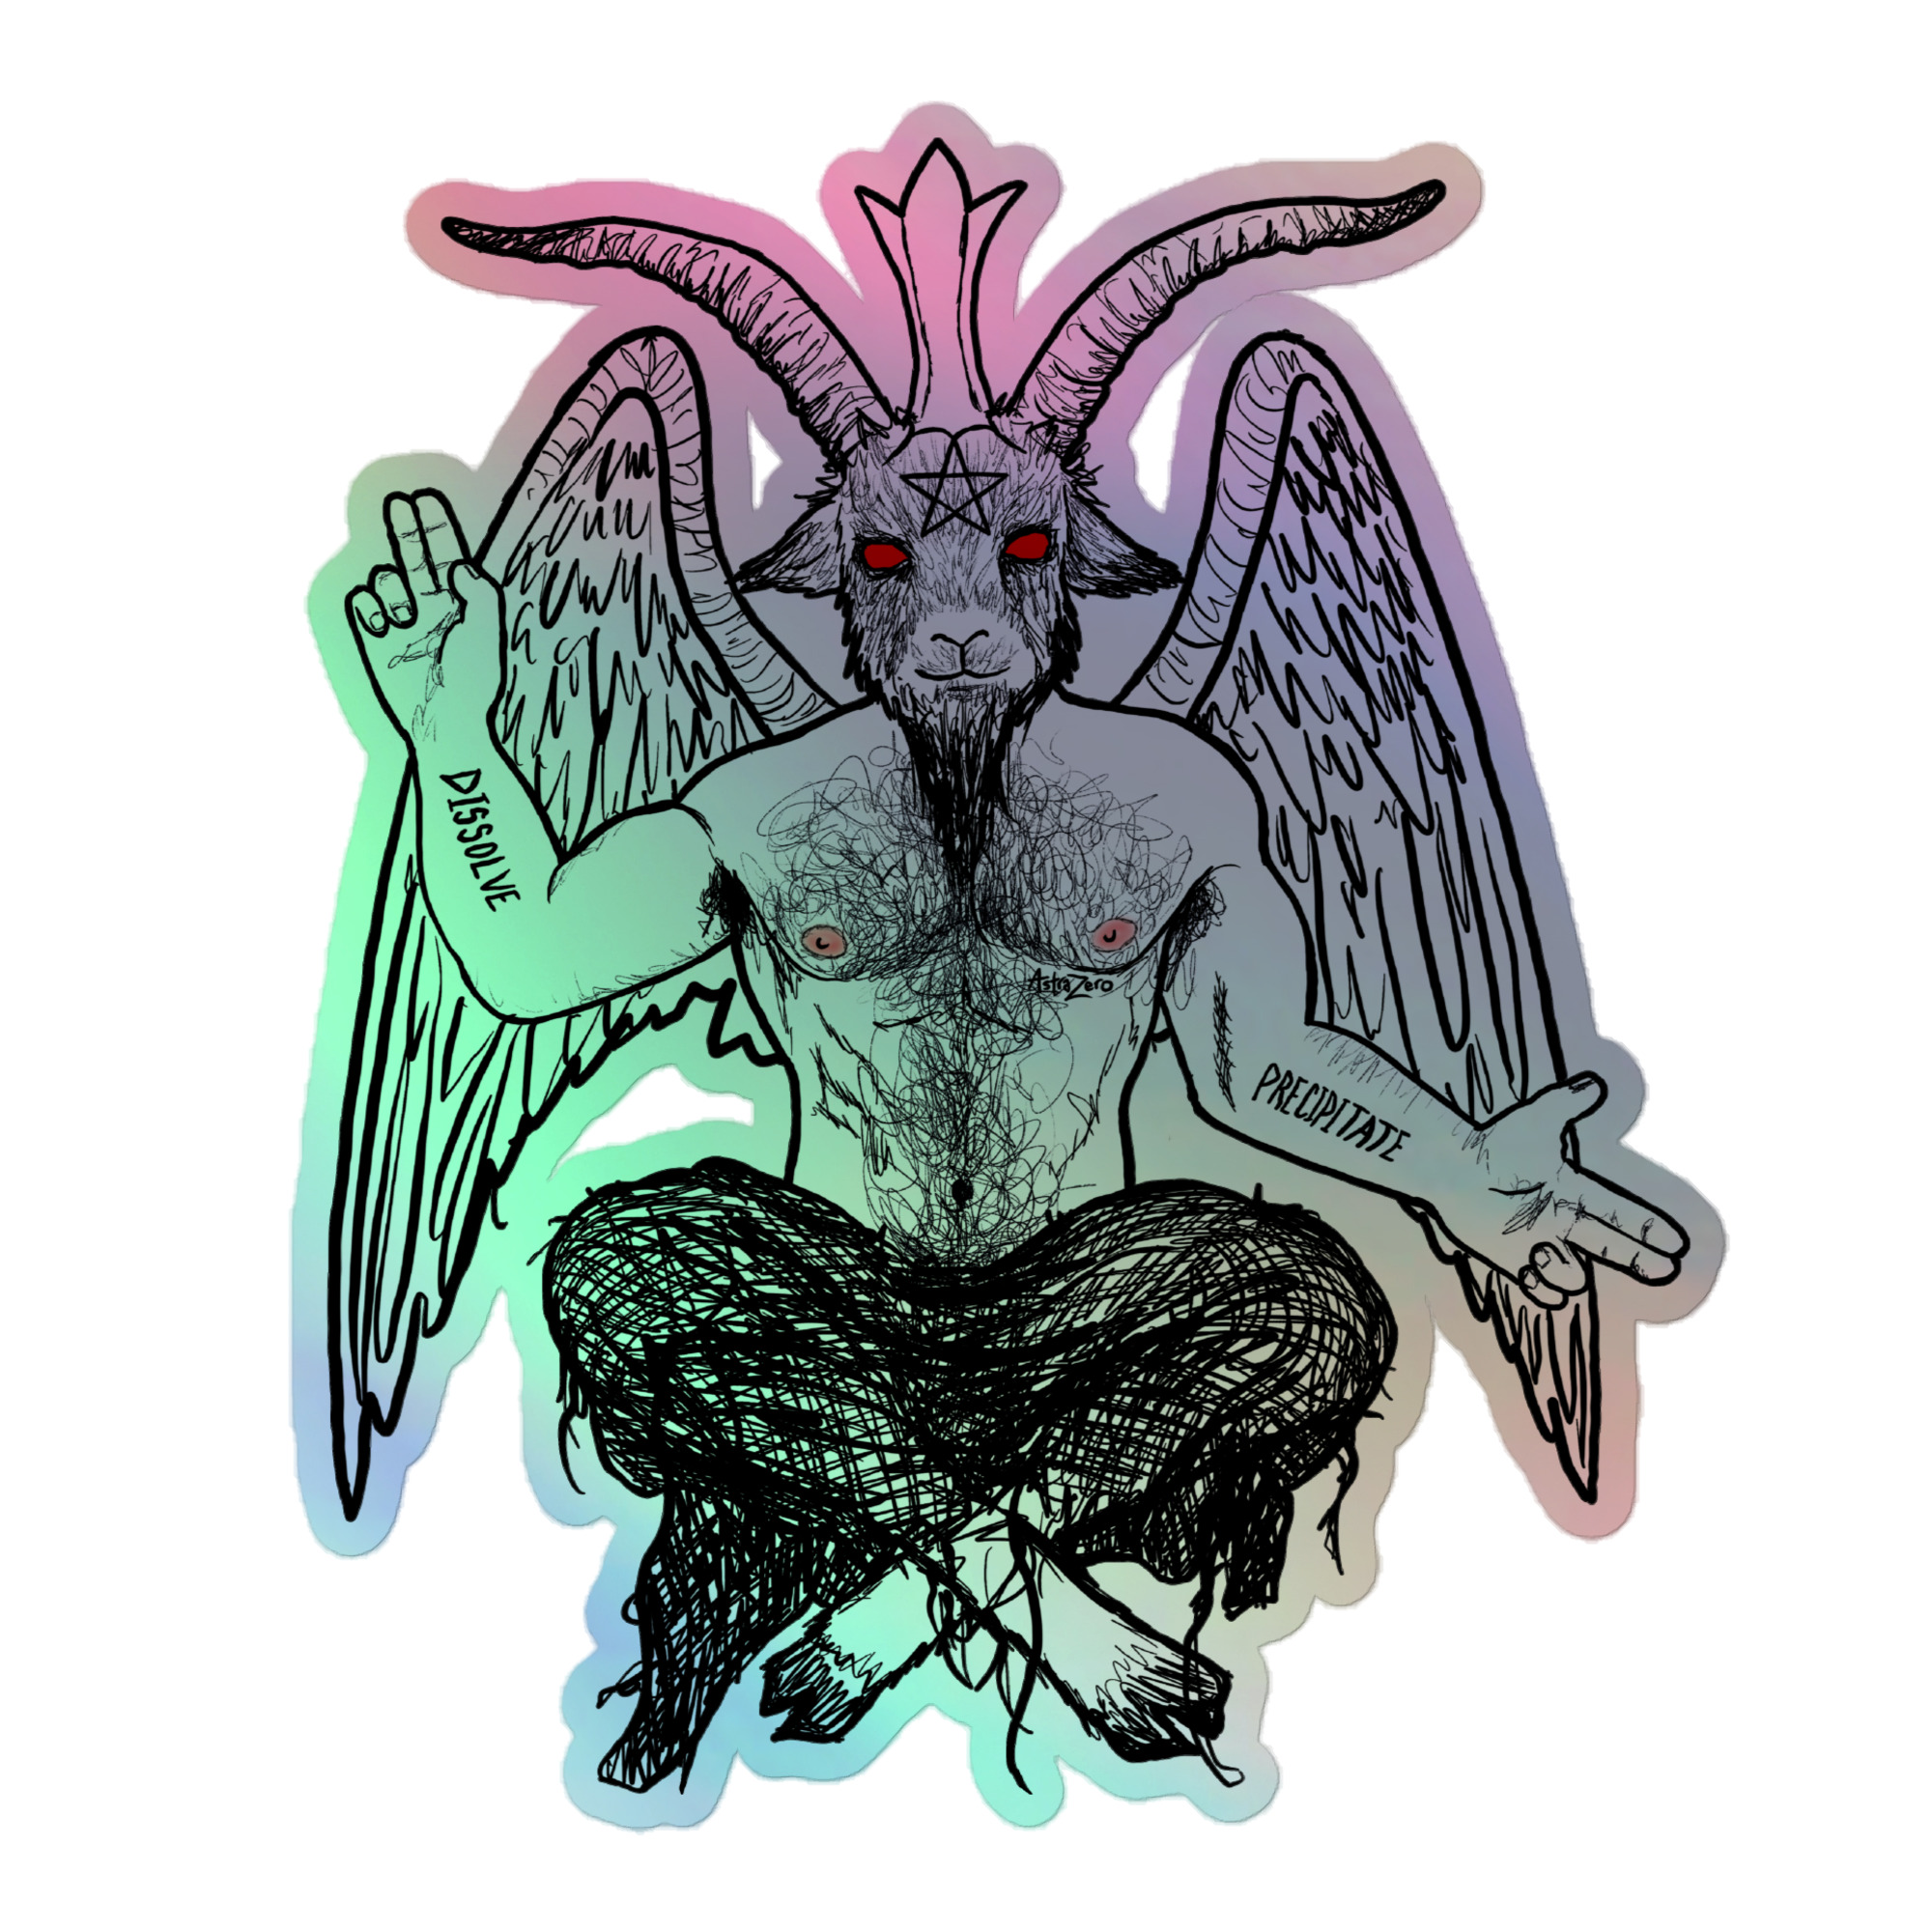 Featured image for “Baphomet Beef - Holographic stickers”